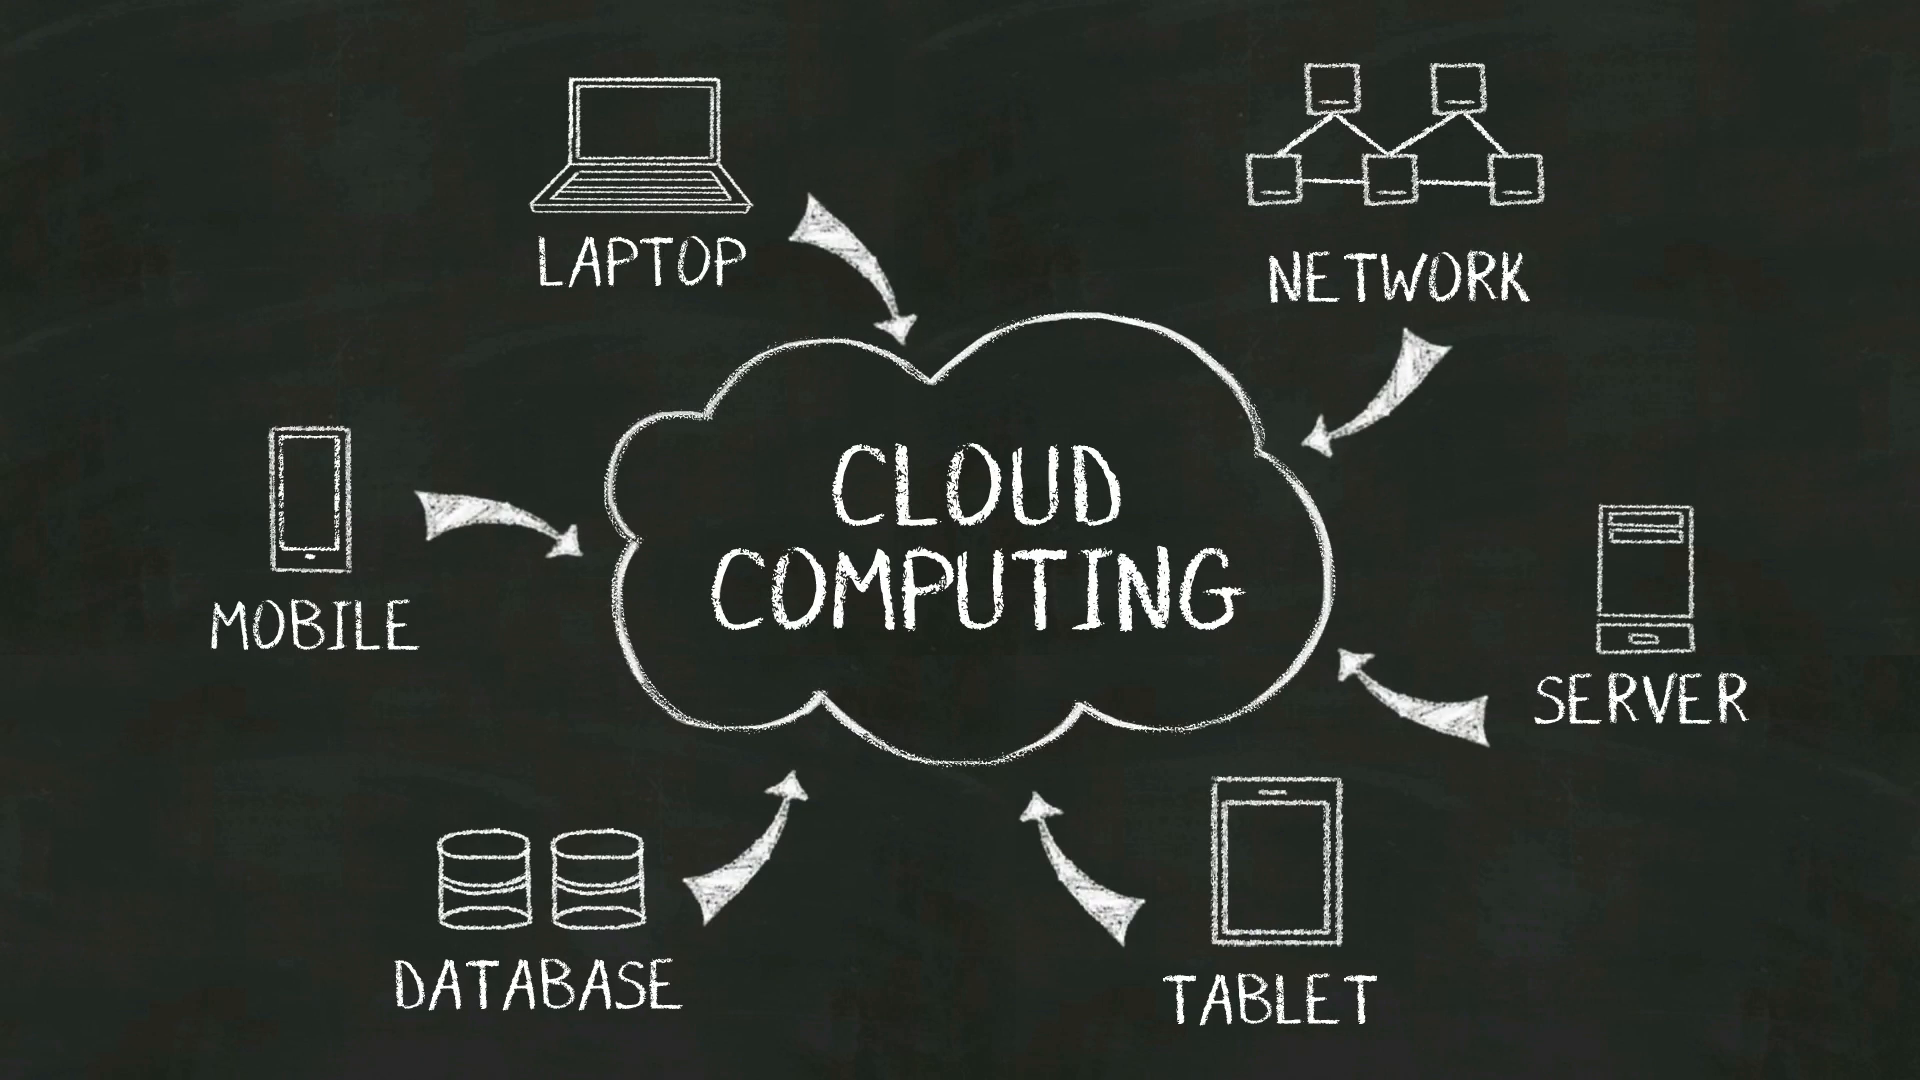 Diploma Certification in Cloud Computing with Microsoft Azure